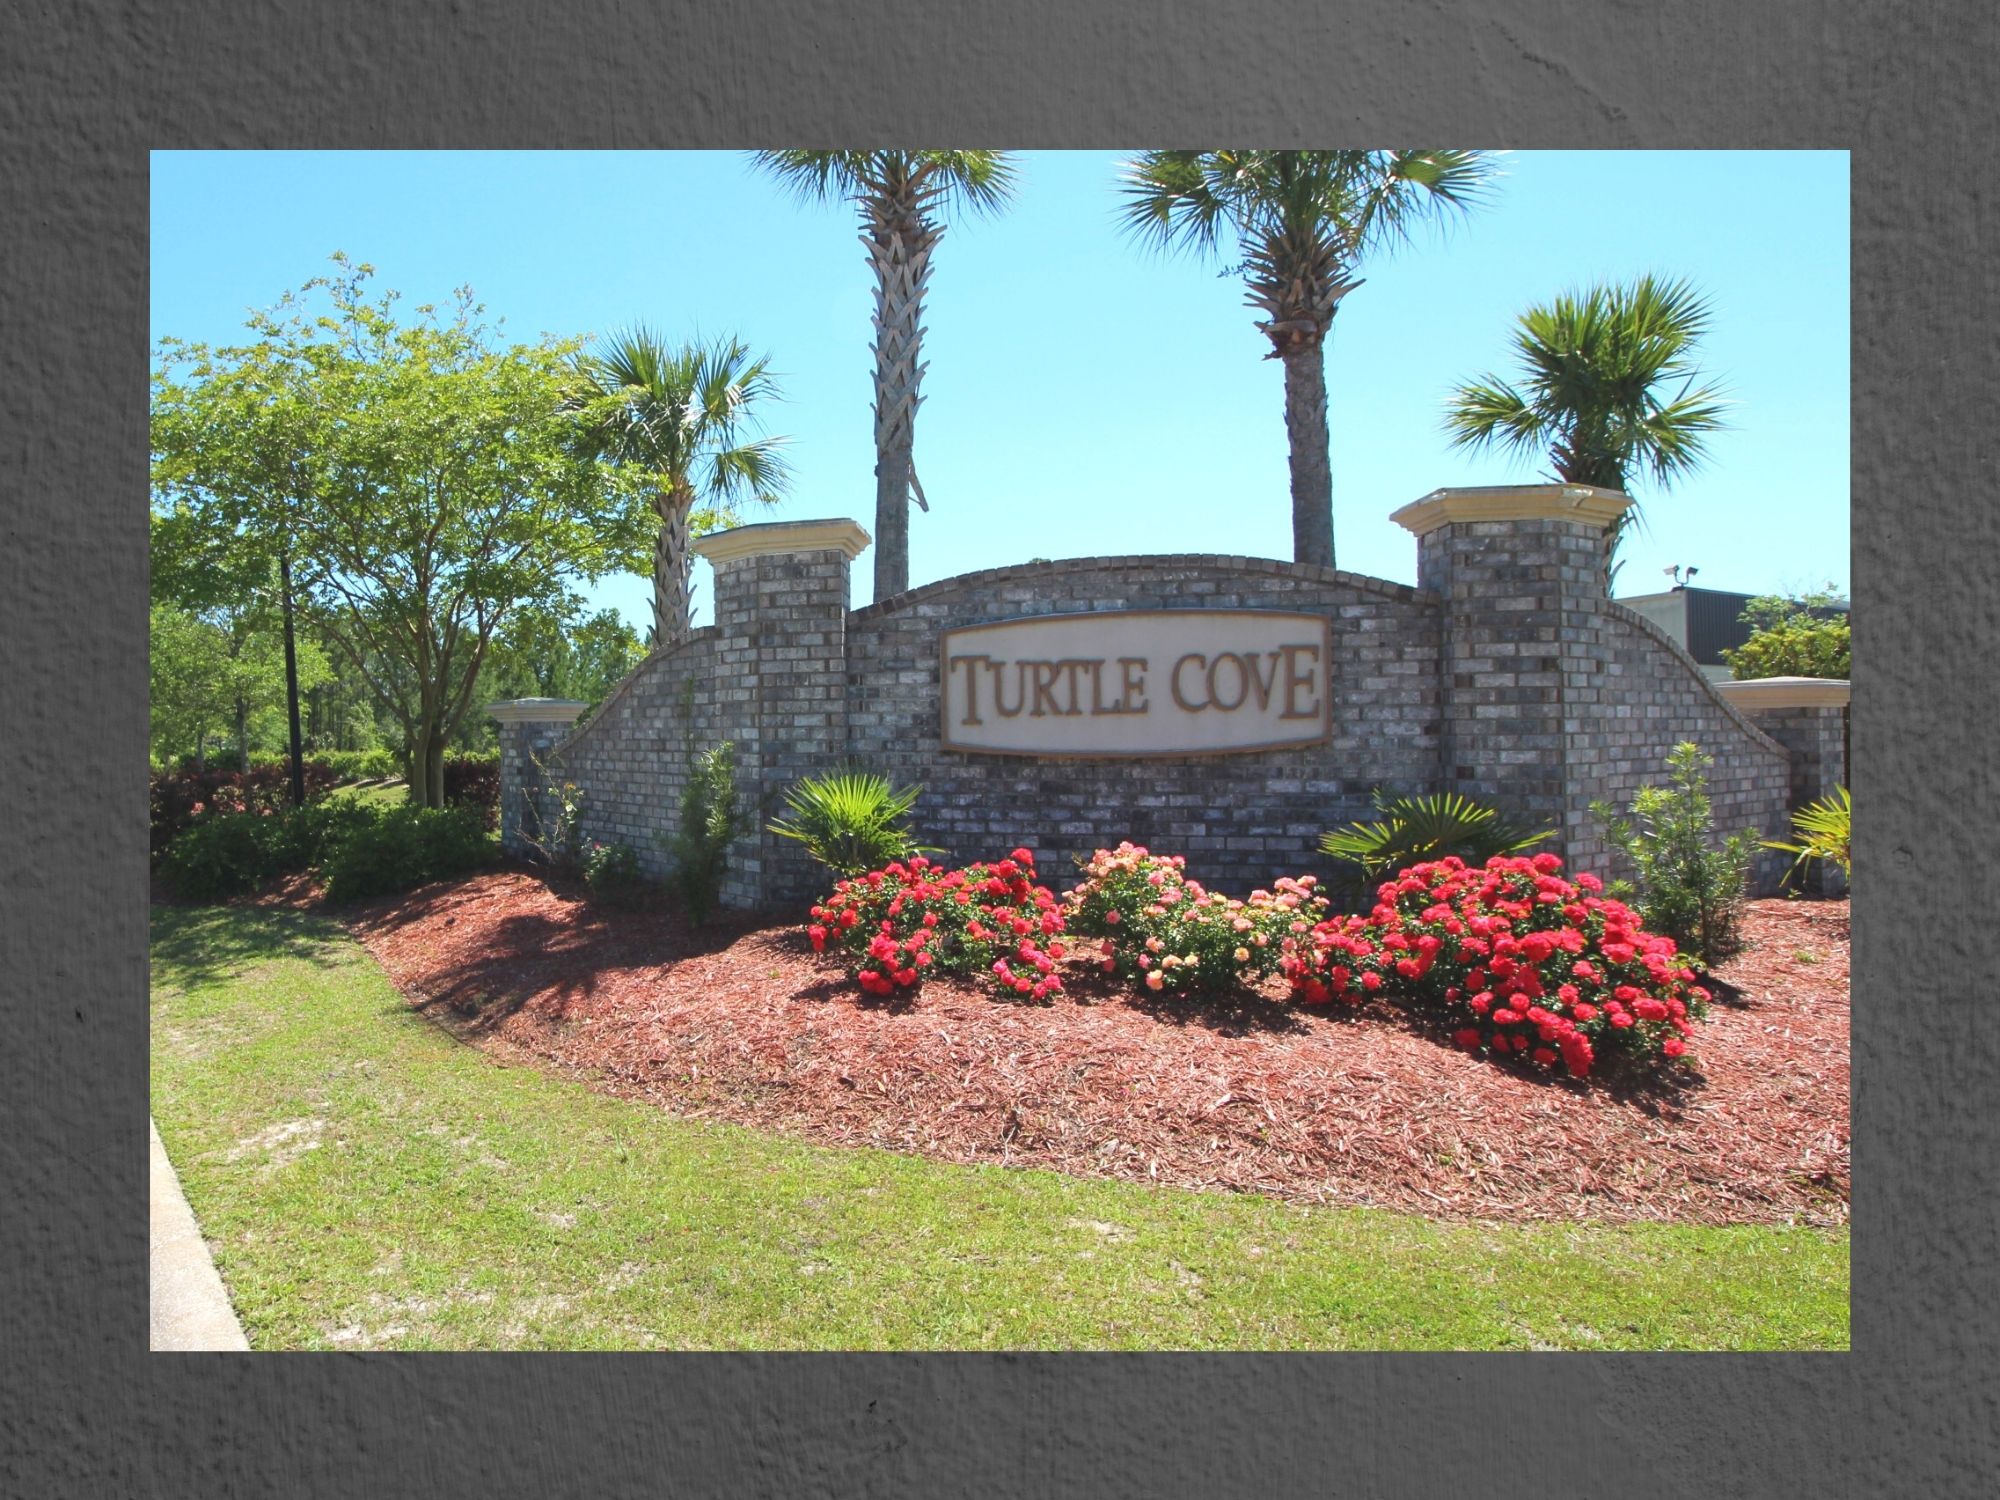 turtle cove, a neighborhood of homes for sale in Myrtle Beach